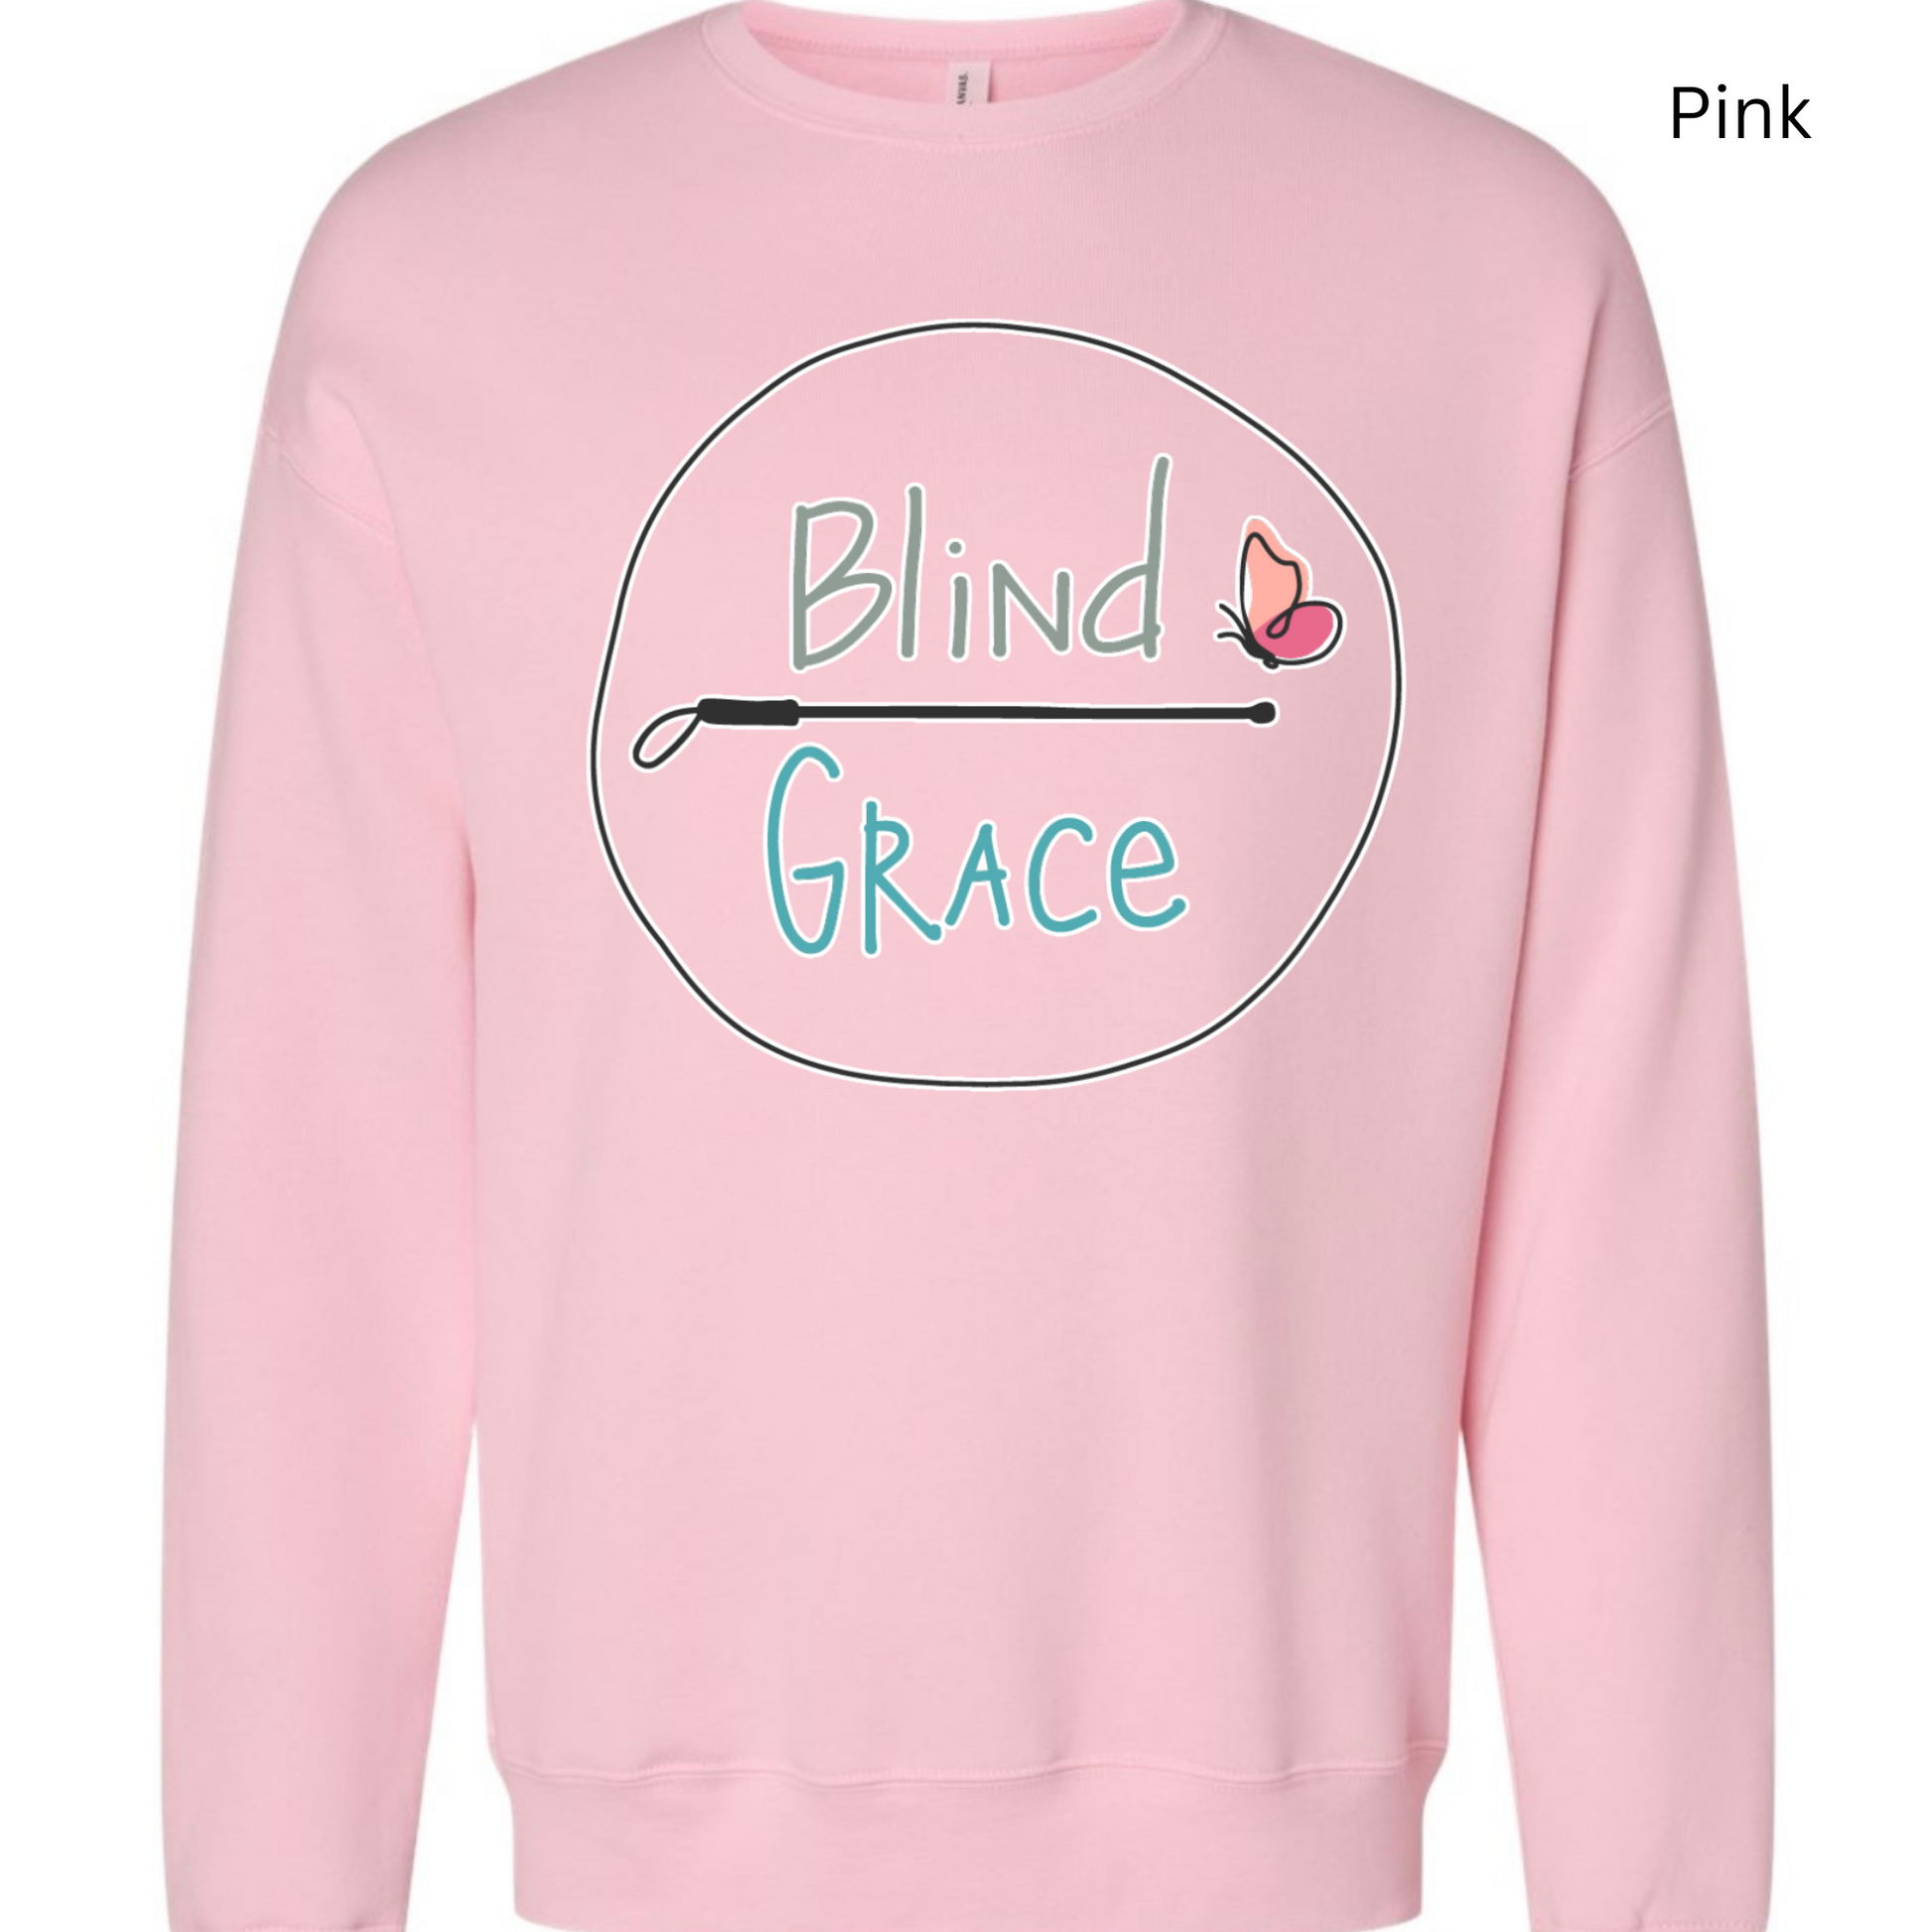 Pink crewneck sweatshirt with the original blind Grace logo (blind in olive green over a cane with Grace in turquoise and a pink and peach butterfly) outlined in white 